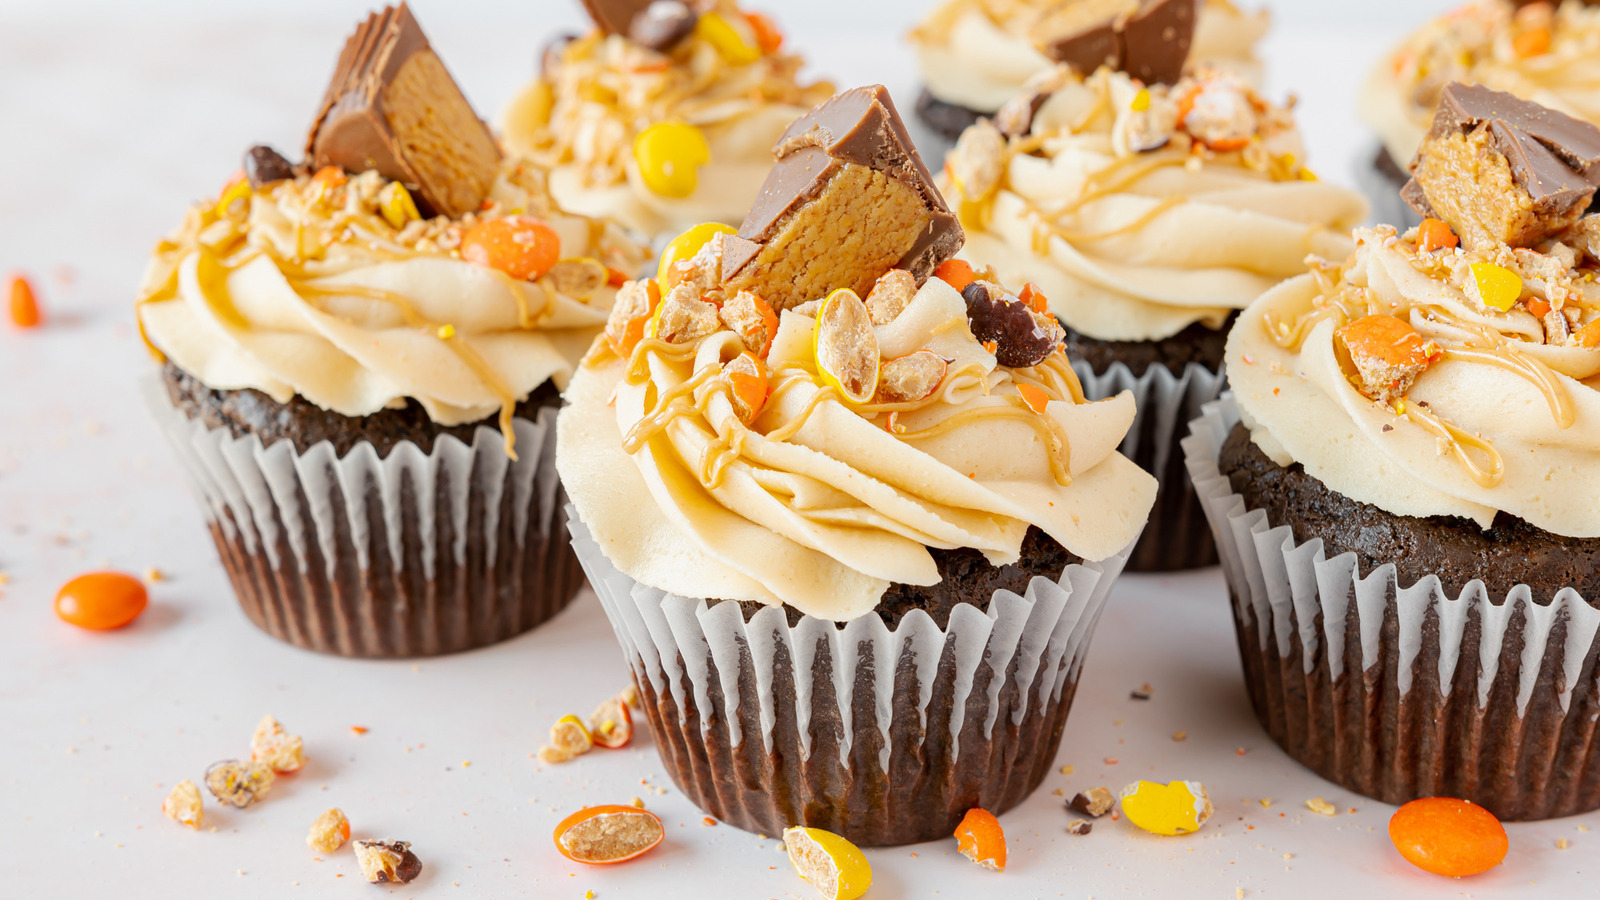 Chocolate Peanut Butter Filled Cupcakes - Stephanie's Sweet Treats